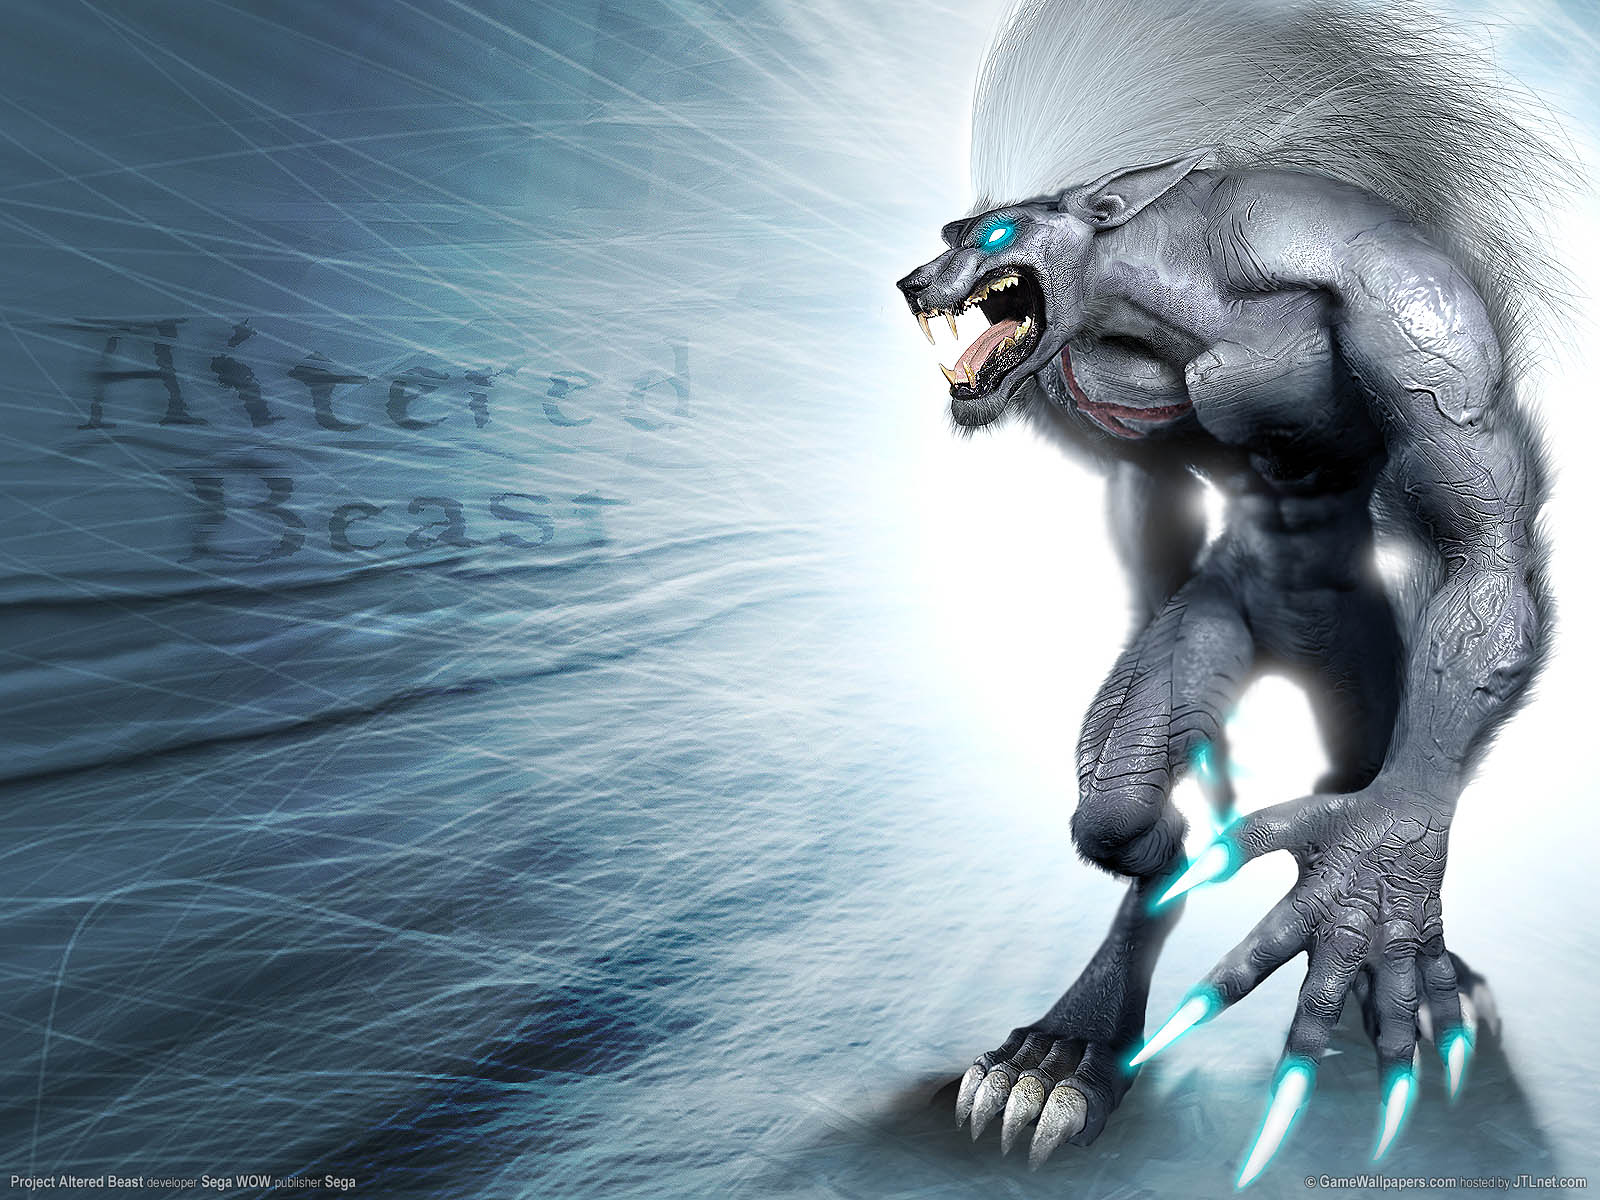 Project Altered Beast wallpaper 01 1600x1200